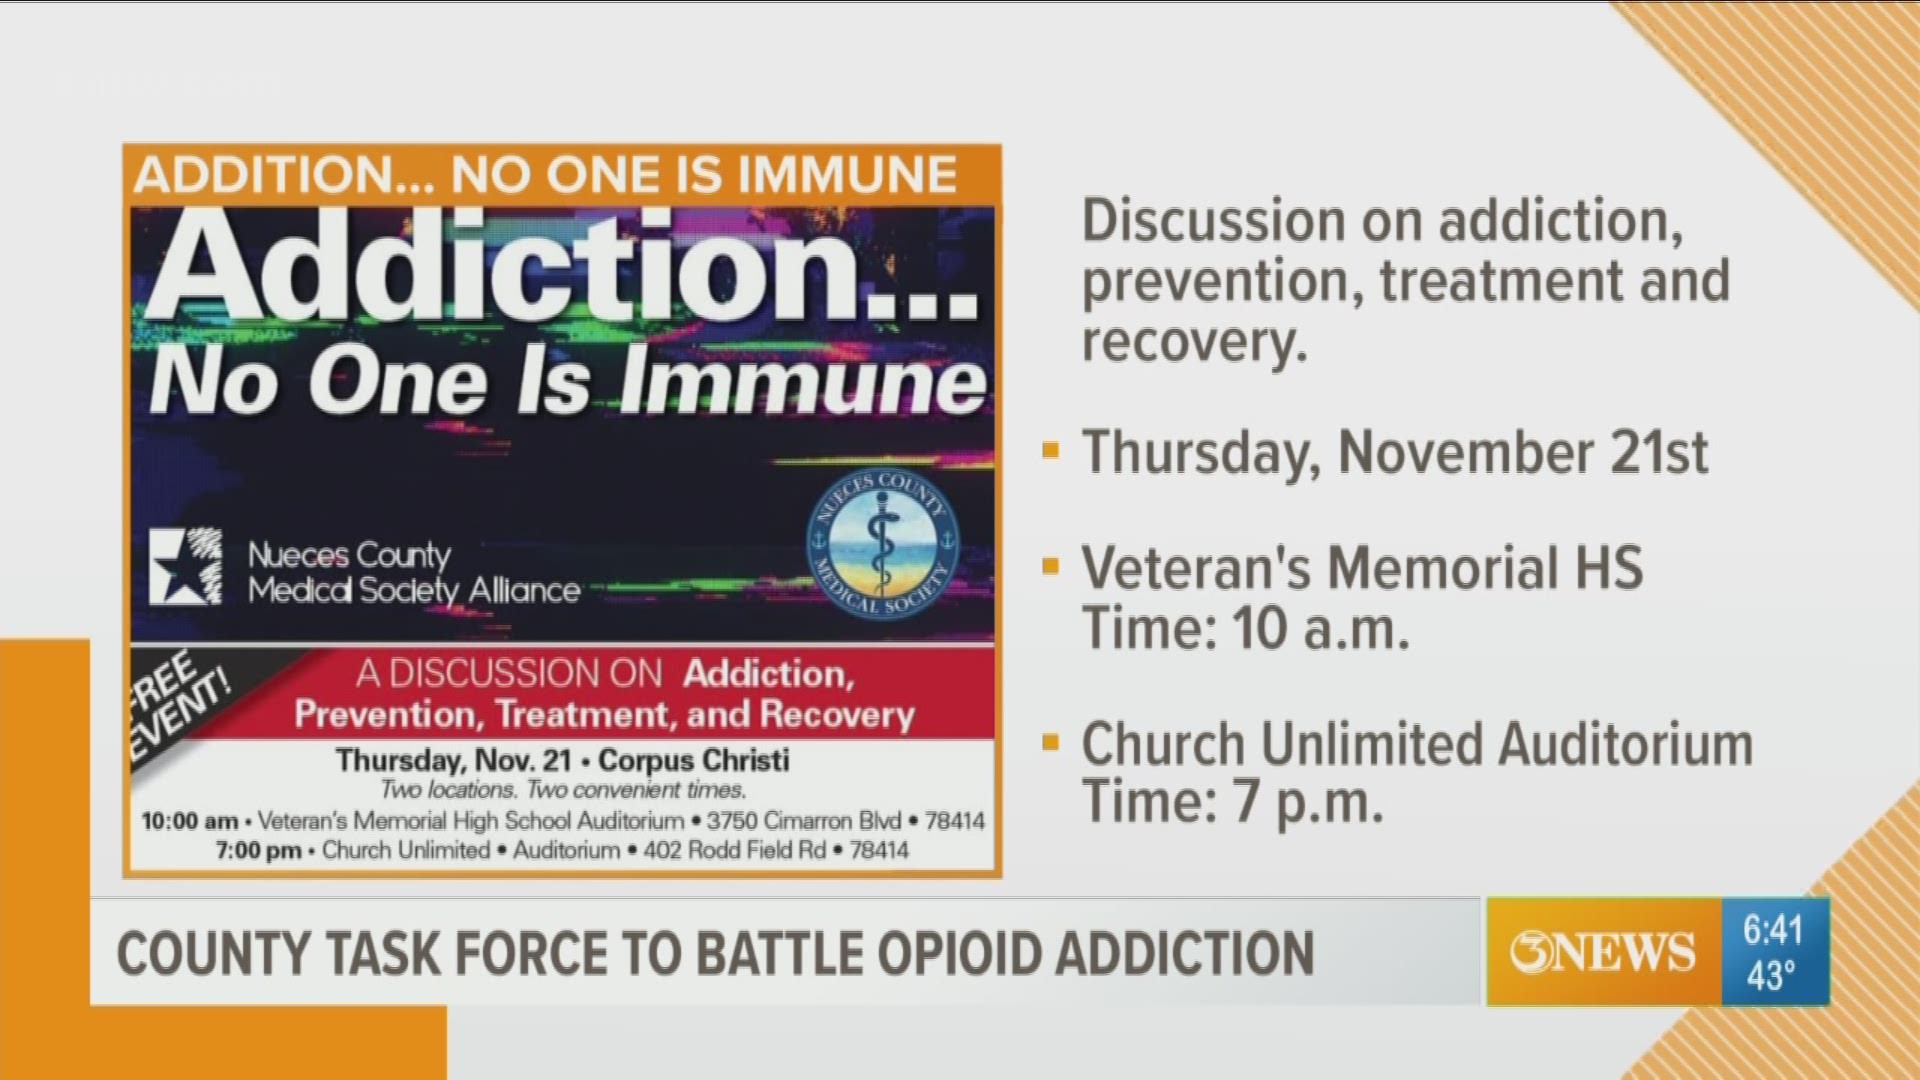 "Addiction...No One Is Immune" is the focus of the free event which is held at two different locations and two convenient times on Thursday, November 22.